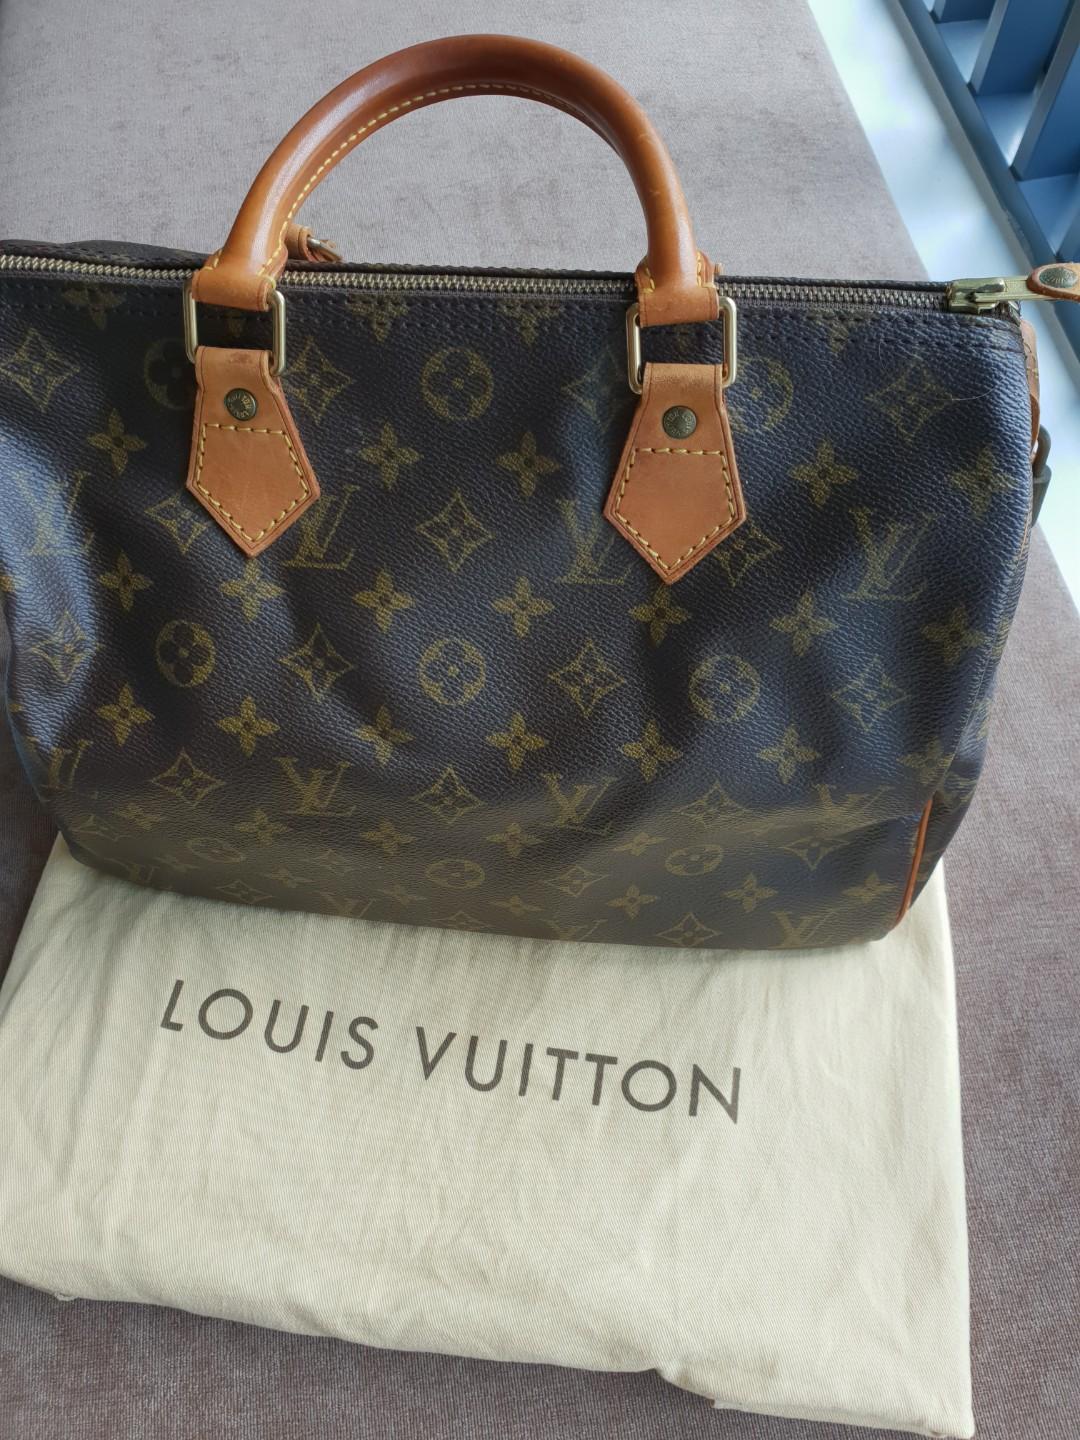 Buy [Used] LOUIS VUITTON Speedy 30 Boston Bag Monogram M41526 from Japan -  Buy authentic Plus exclusive items from Japan